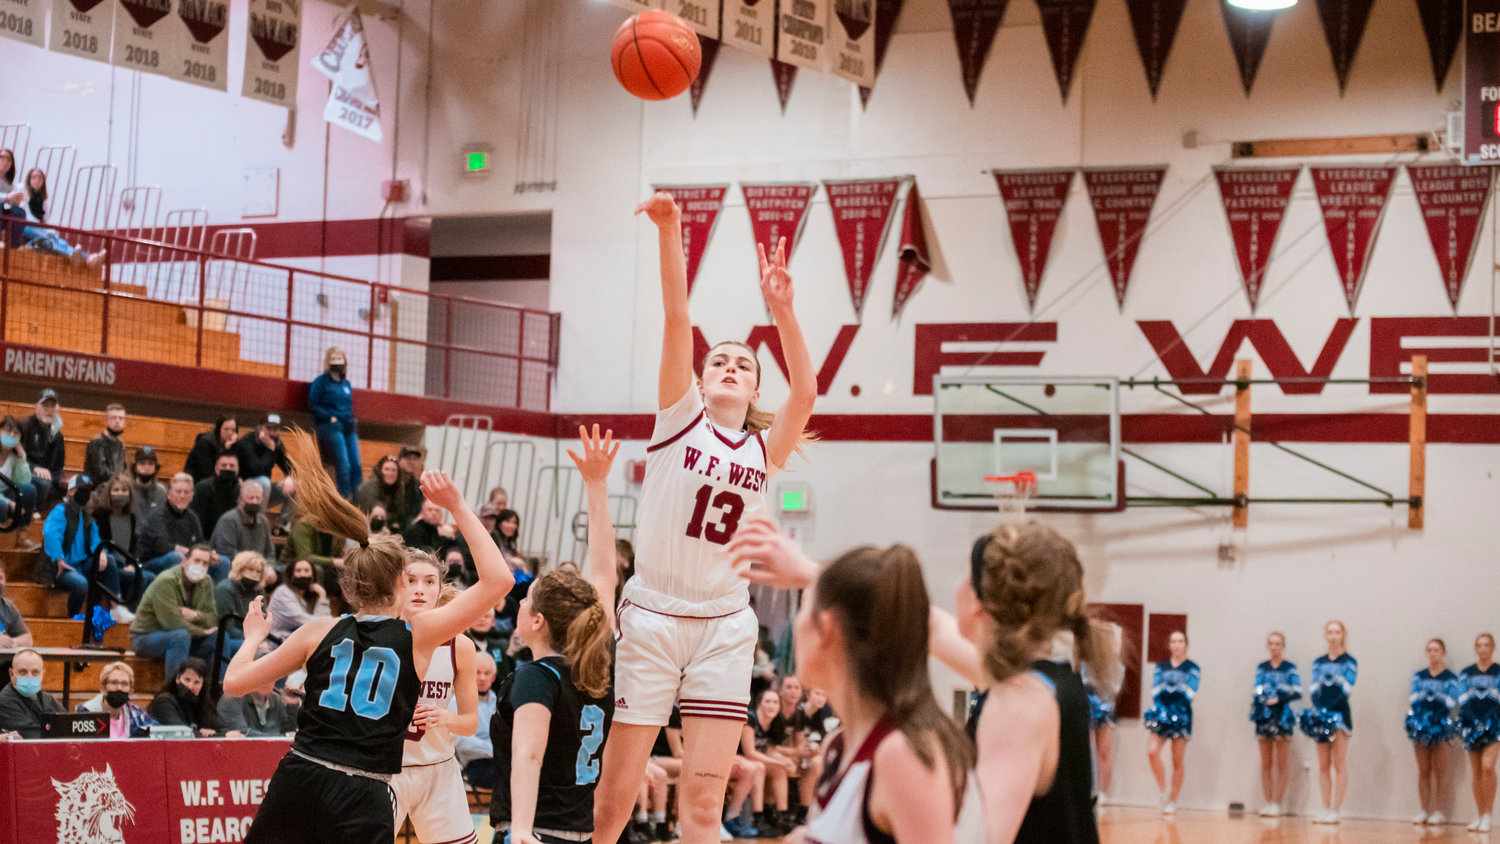 W.F. West senior Drea Brumfield (13) puts up a shot during a game Friday night in Chehalis.